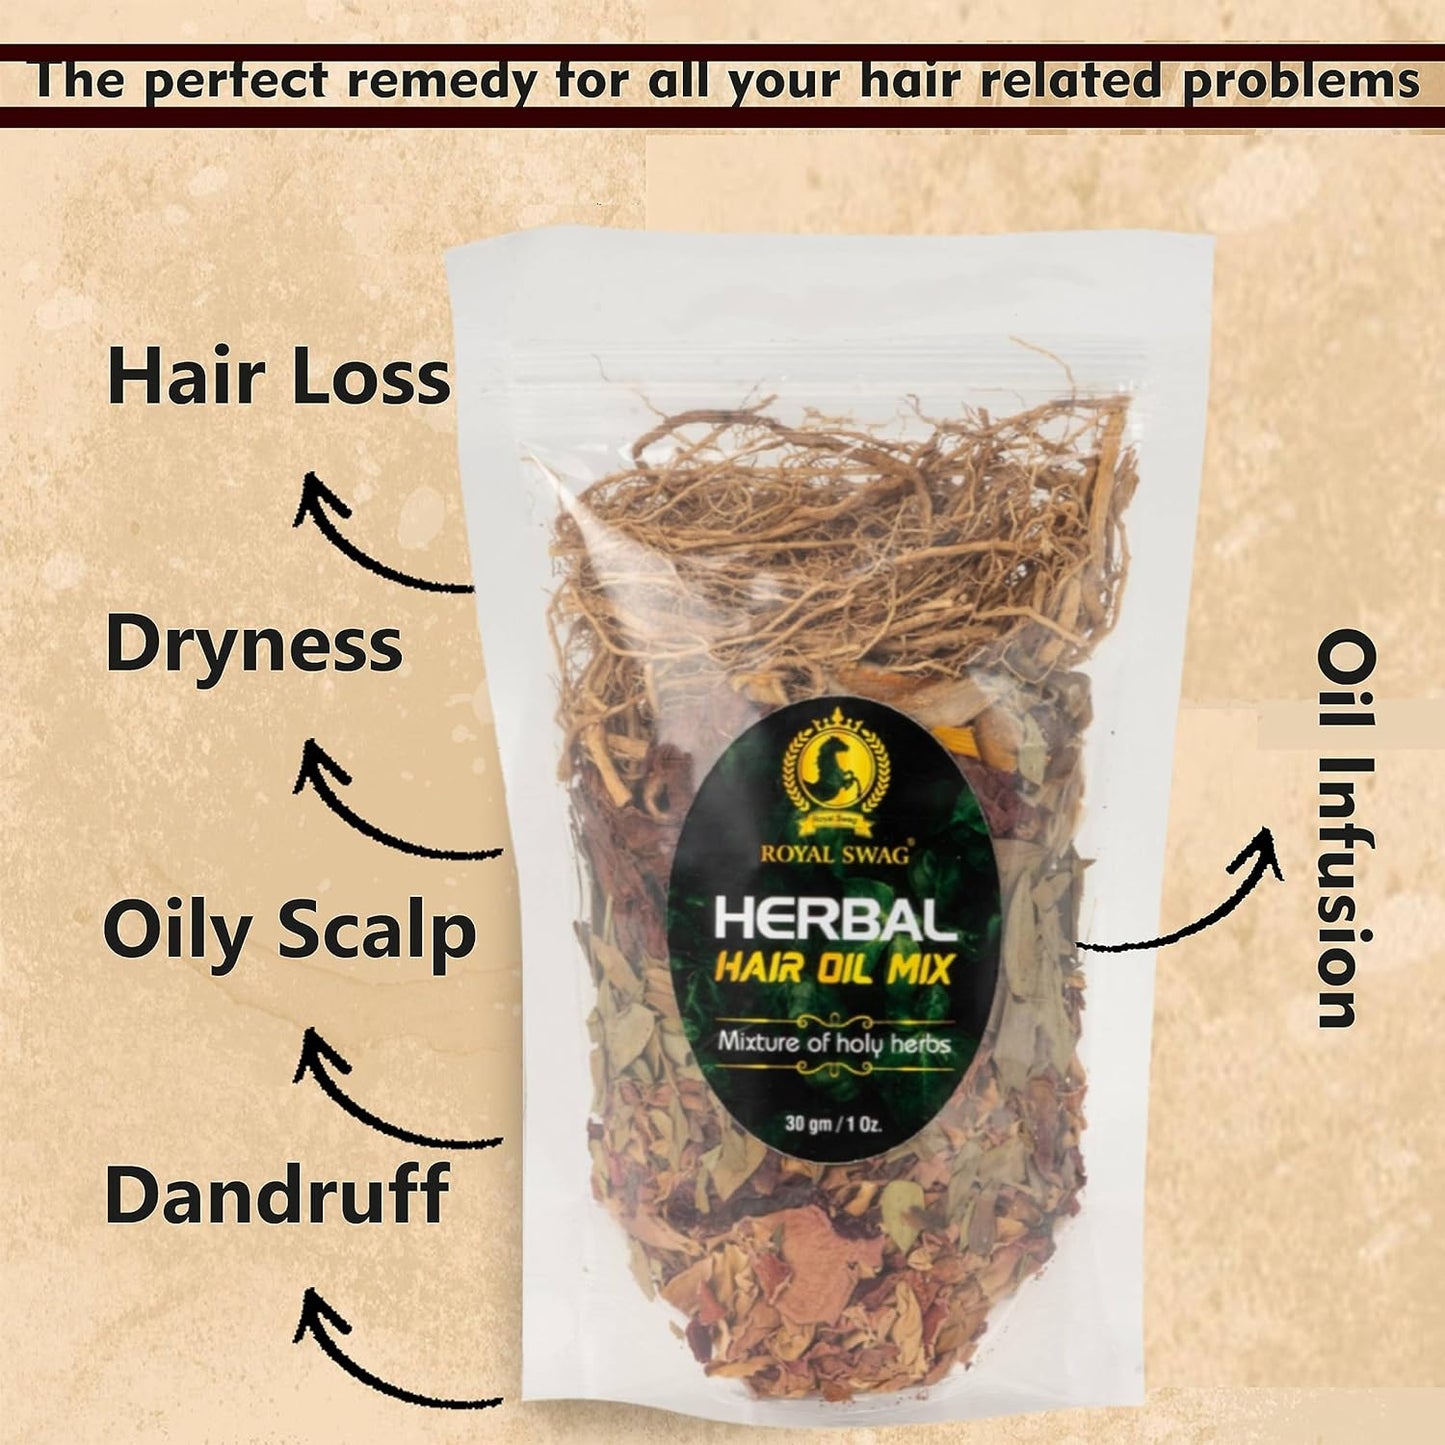 Ayurvedic Herbal Hair Oil Mix 30g pack Jadibooti Mix Dry for Healthy Hair Growth Packed with Goodeness of Ayurvedic Natural Dried Herbs For Oil Infusion |Made In India